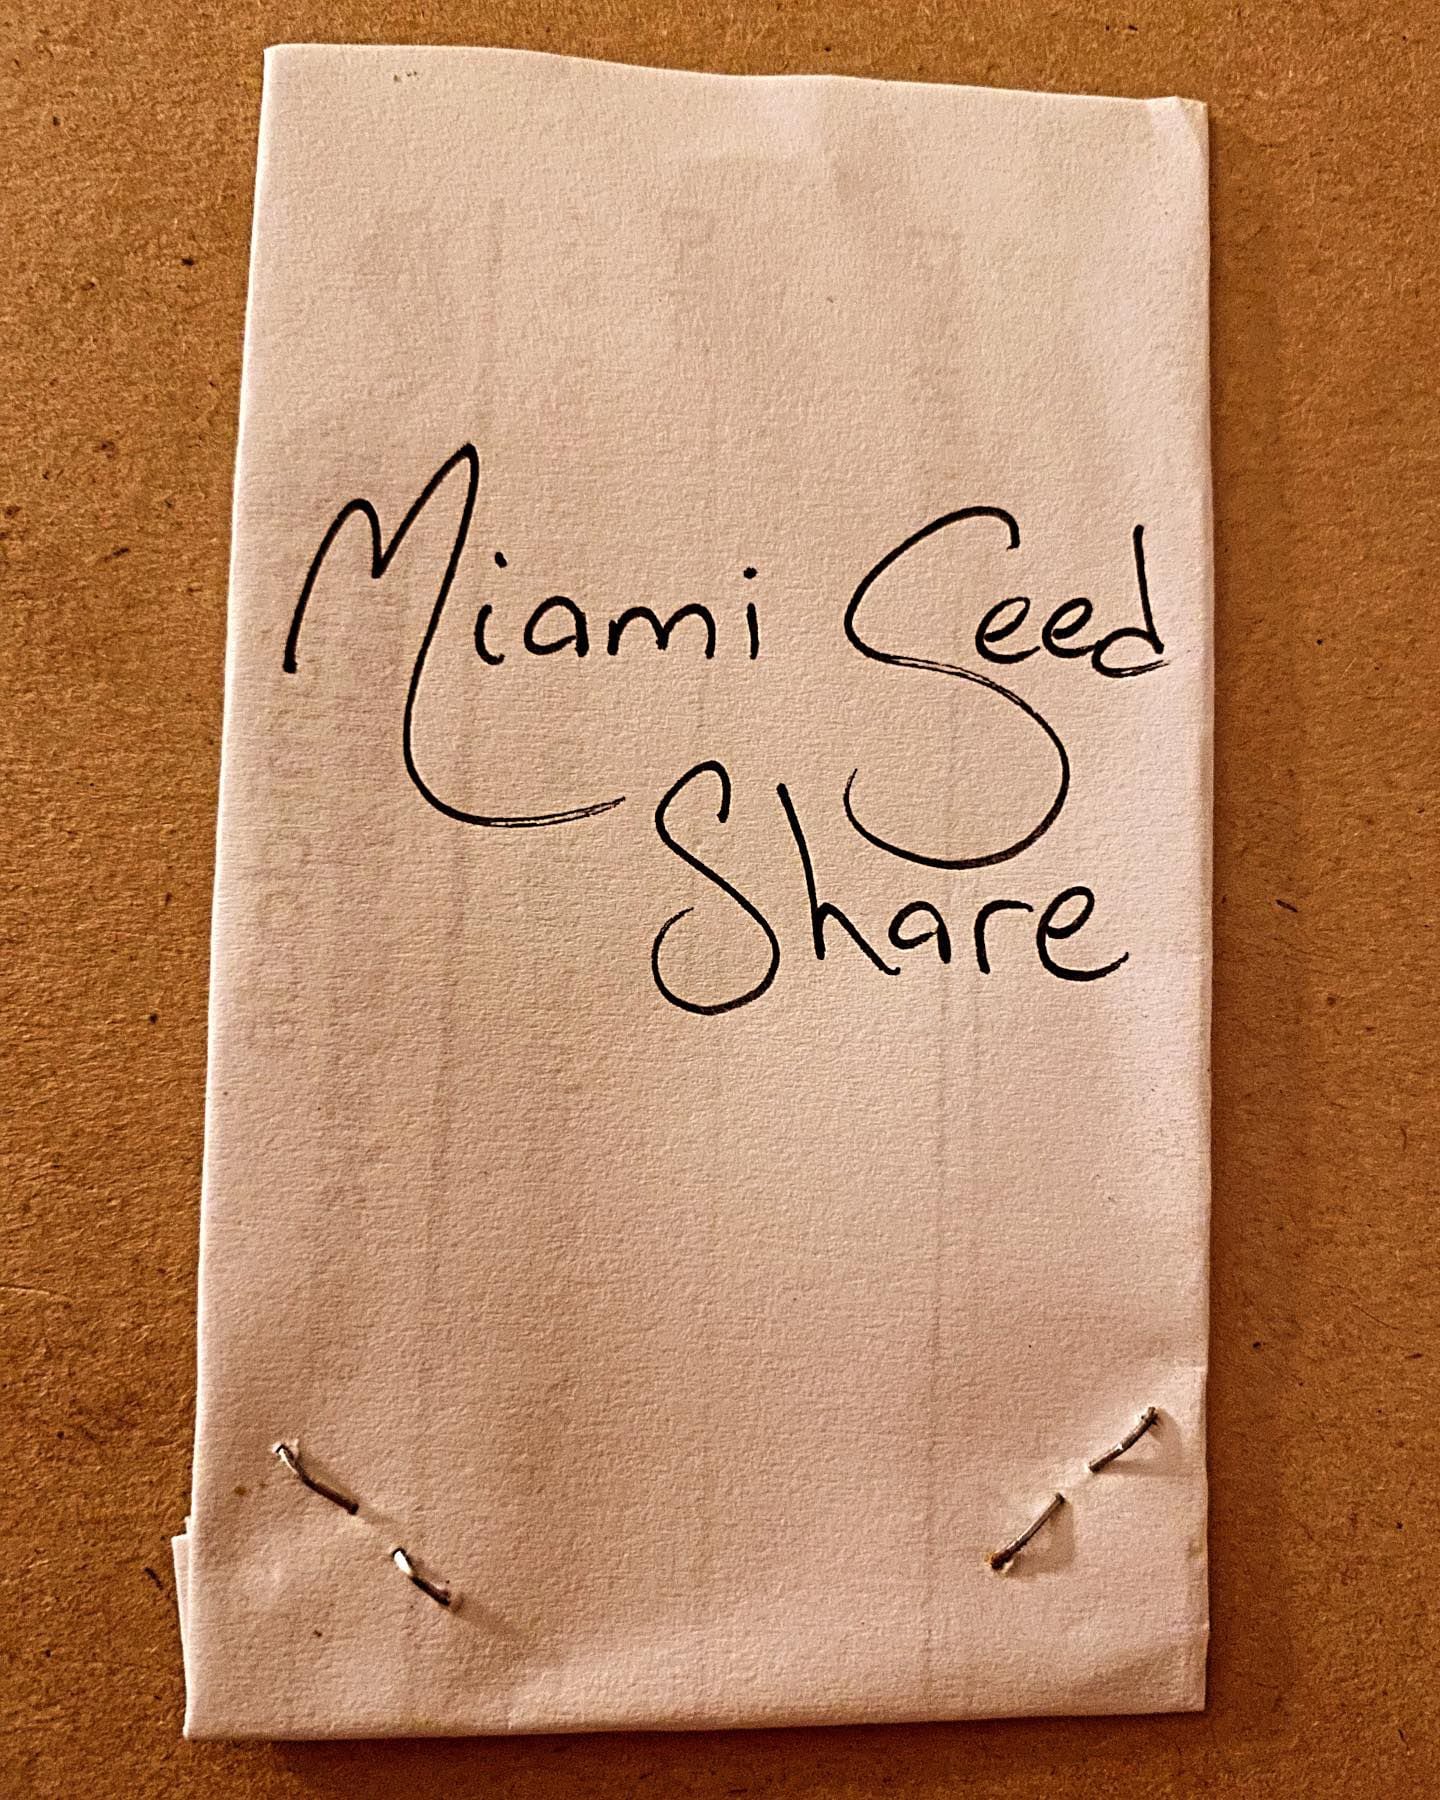 Miami Seed Share